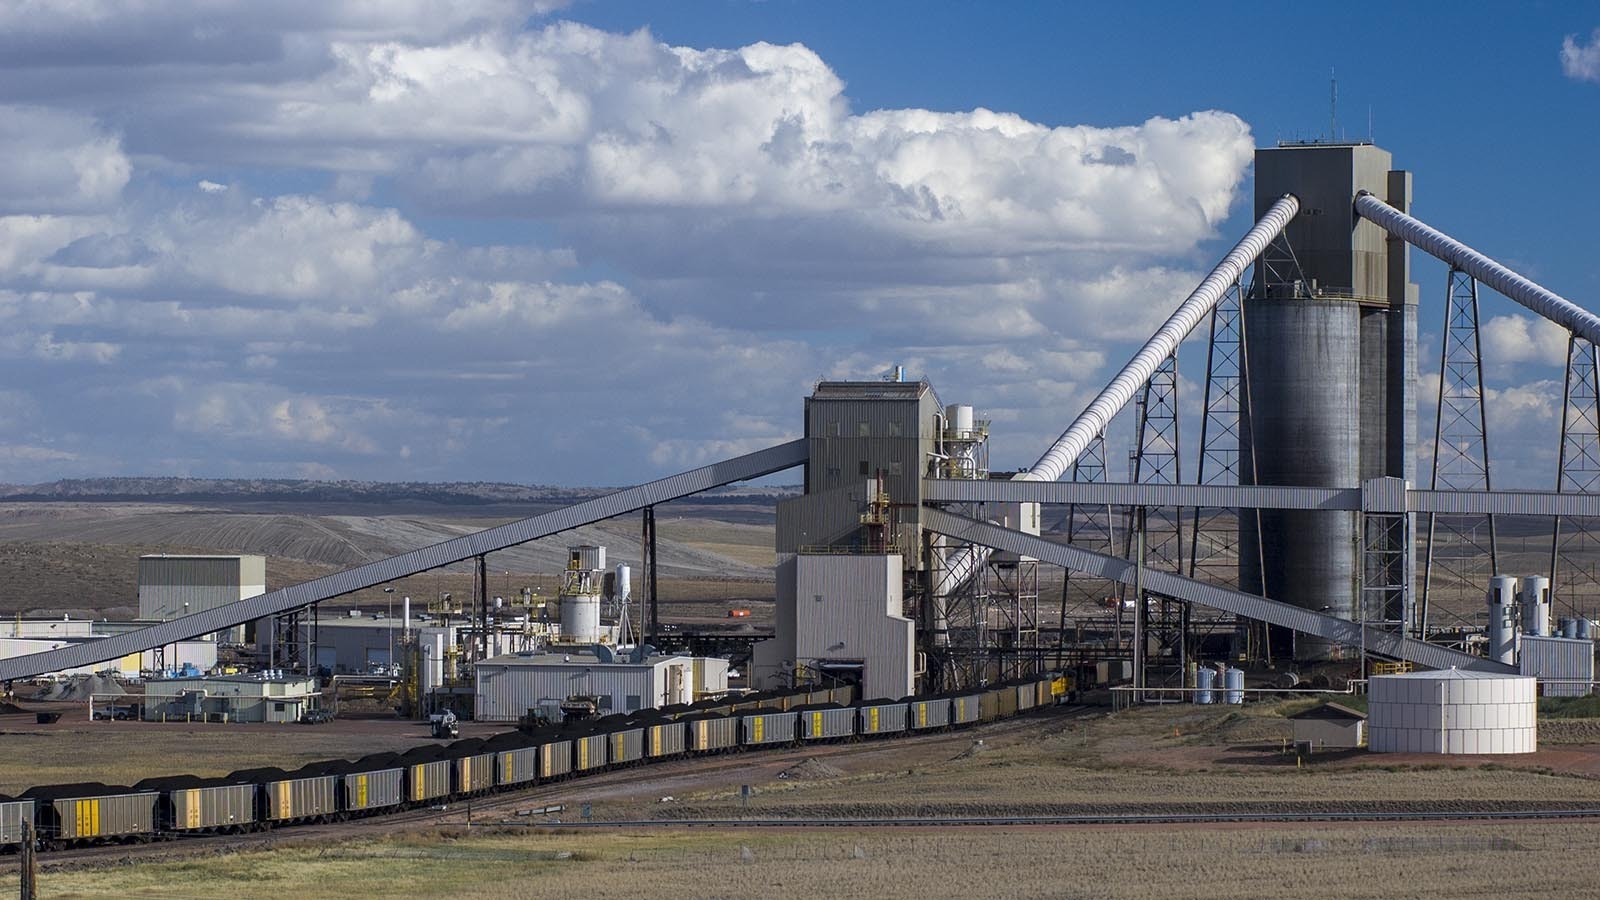 A coal train is loaded at a Wyoming coal mine in this file photo.